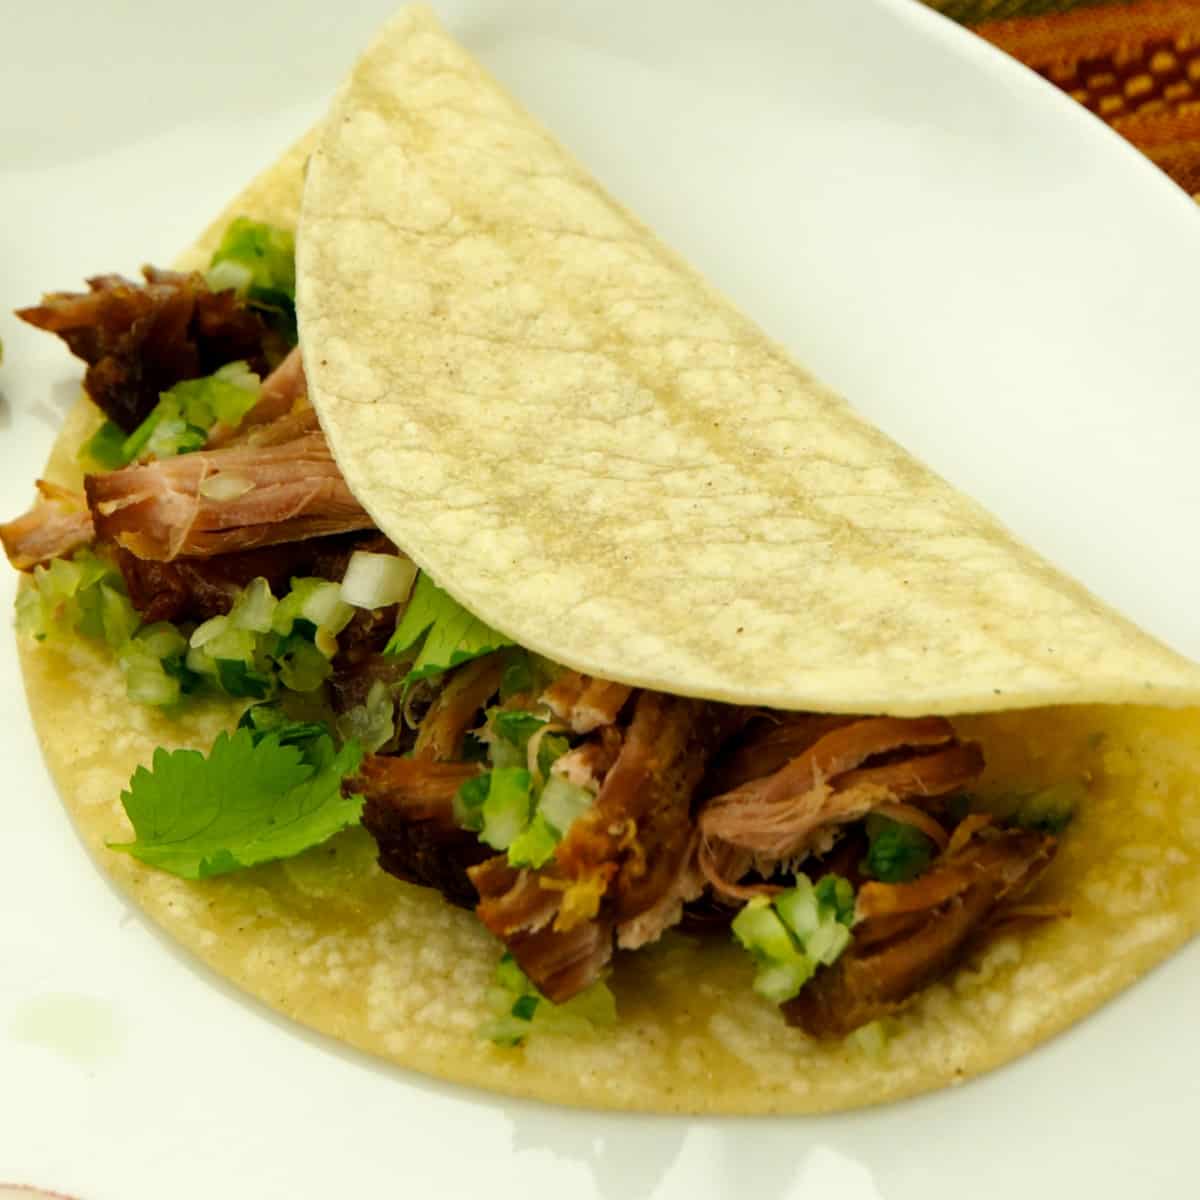 A taco made with authentic Mexican style carnitas.